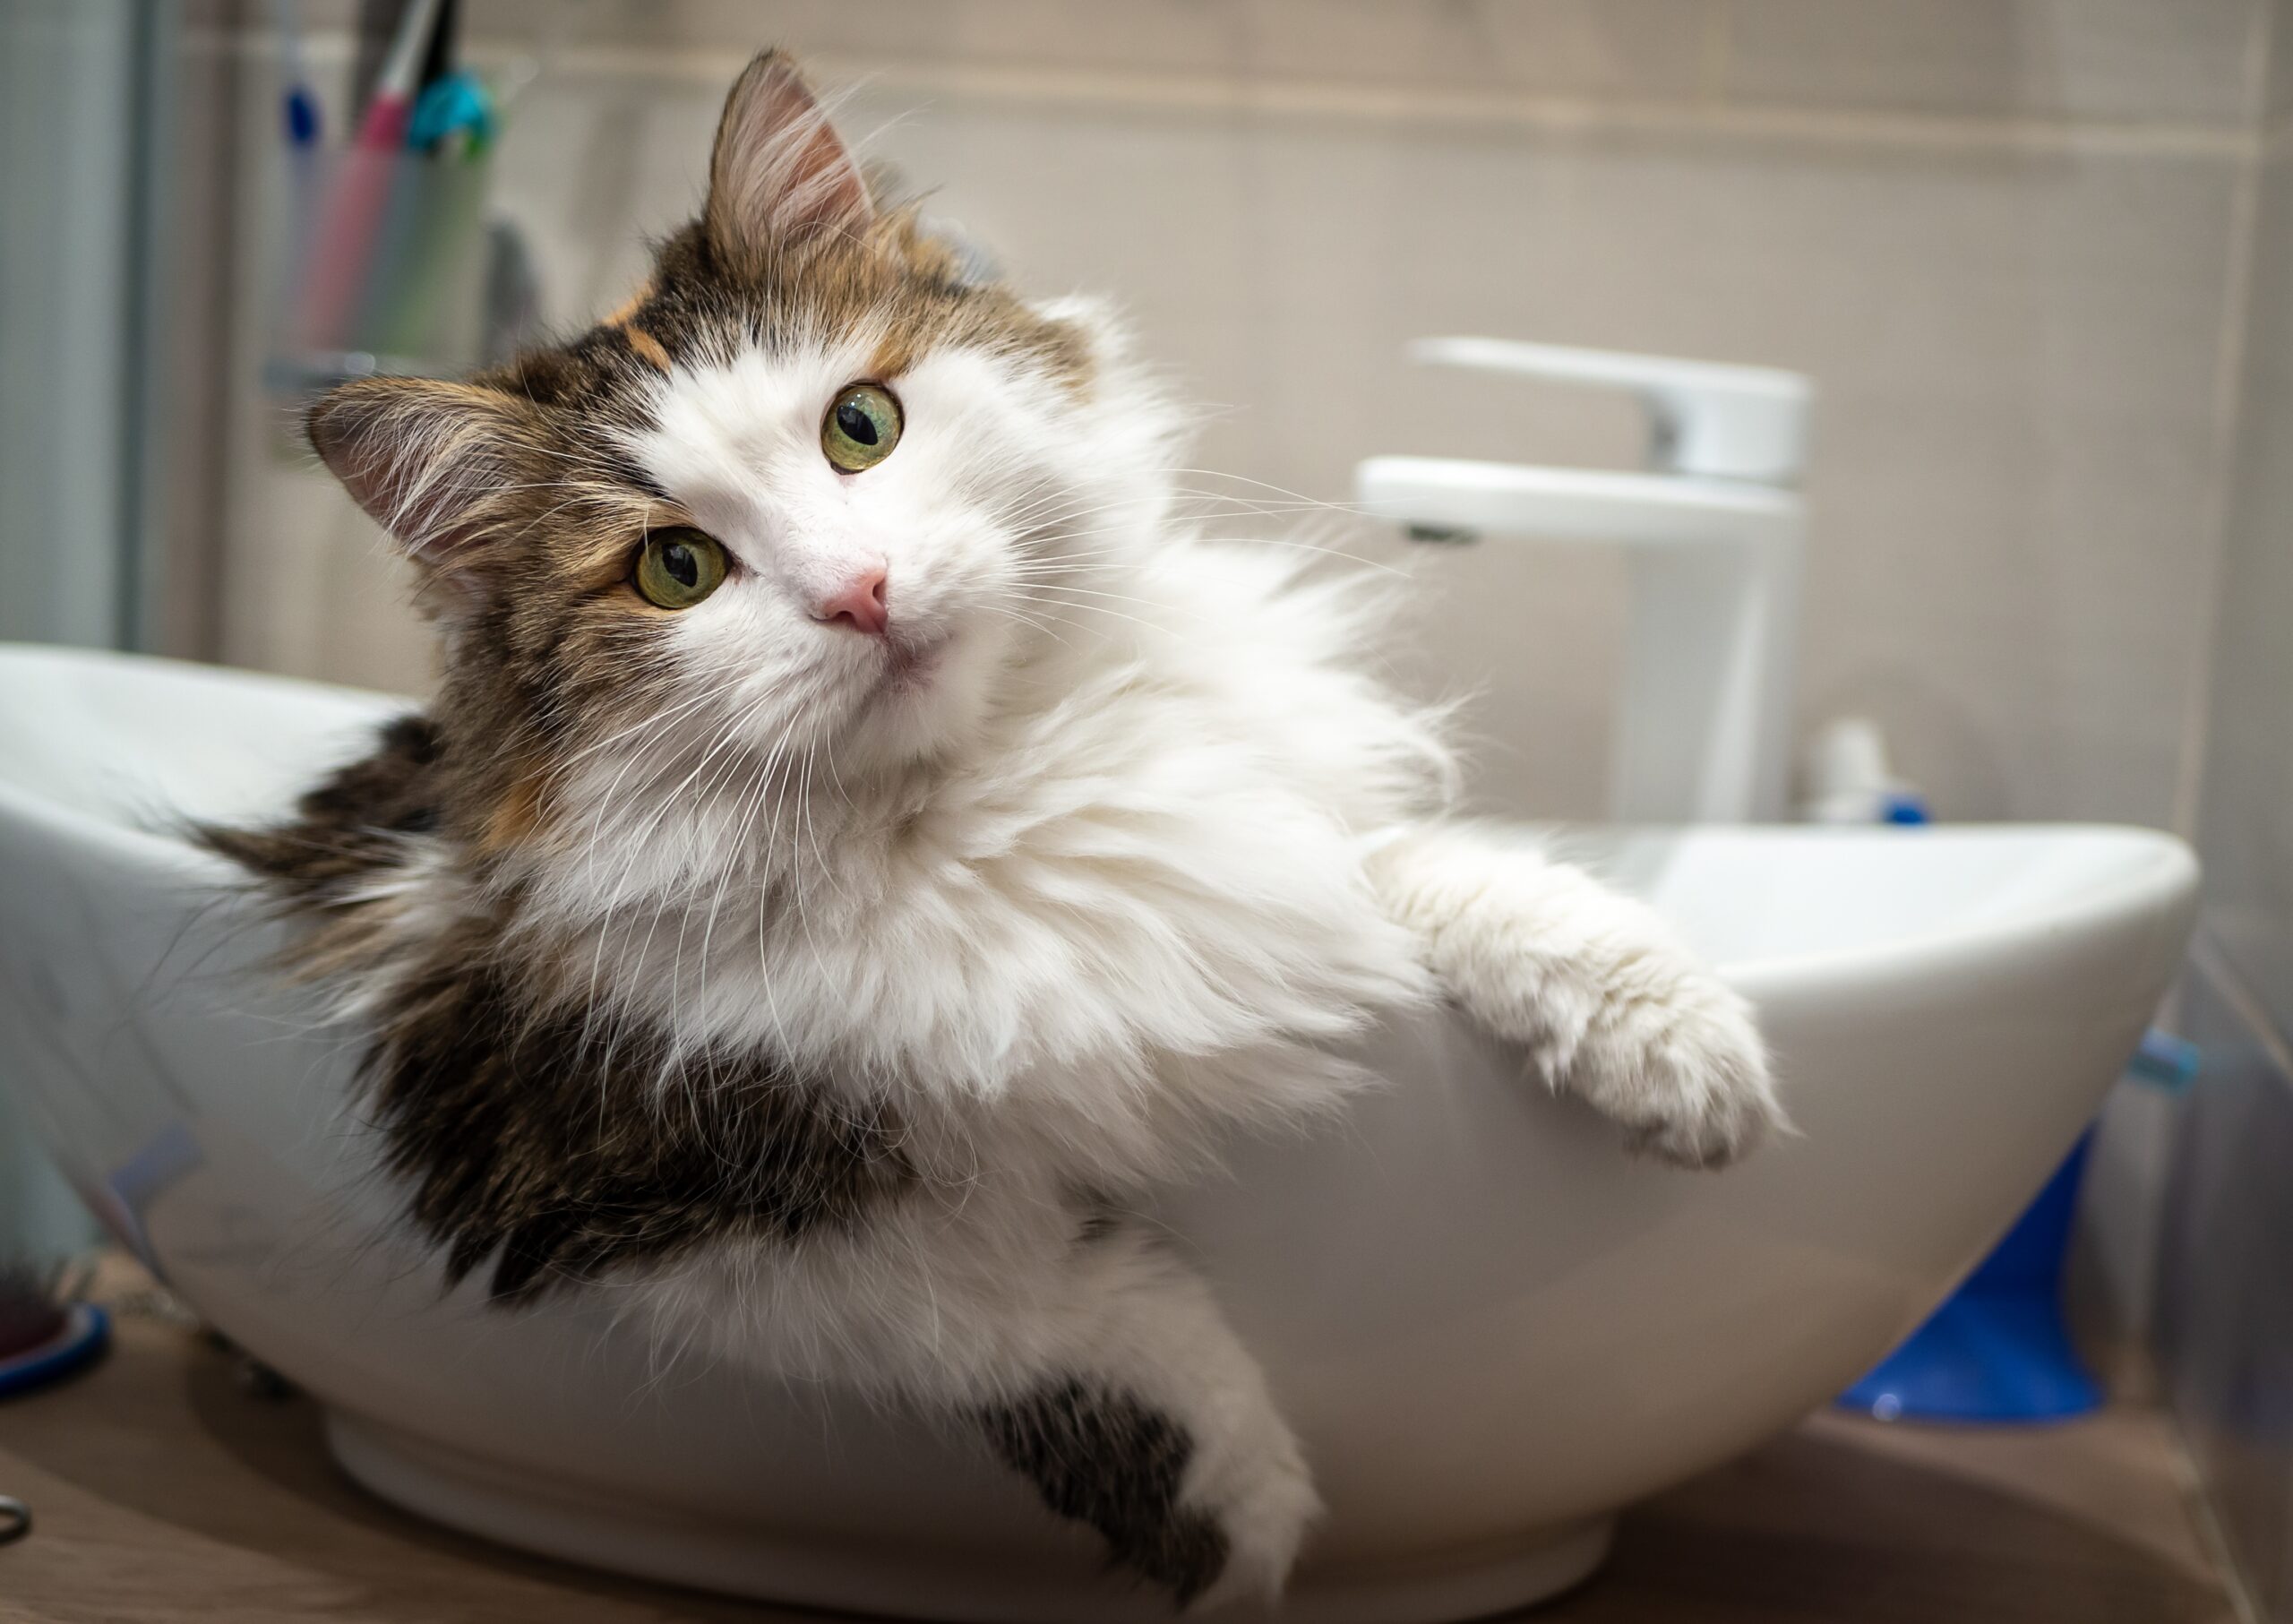 Cat in a small tub for grooming in Brentwood, TN.